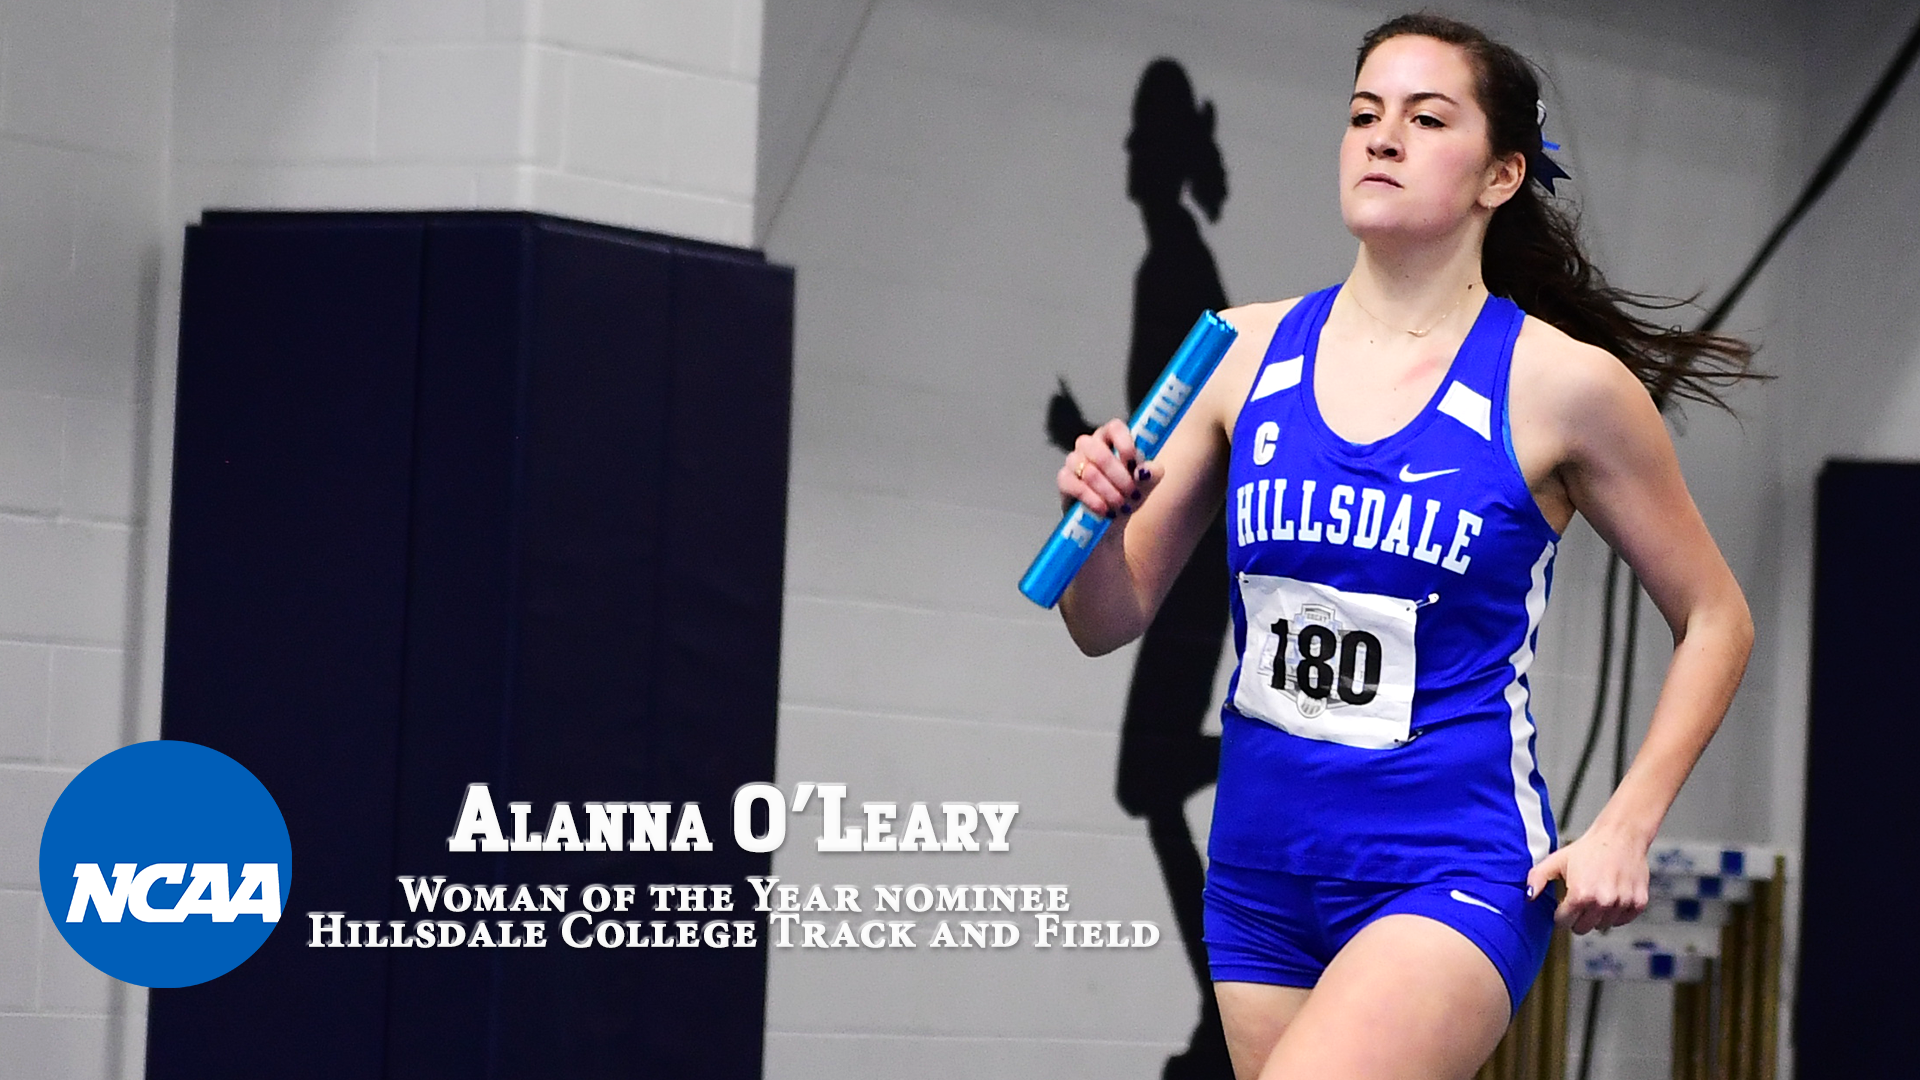 Hillsdale College’s Alanna O’Leary nominated for NCAA Woman of the Year Award